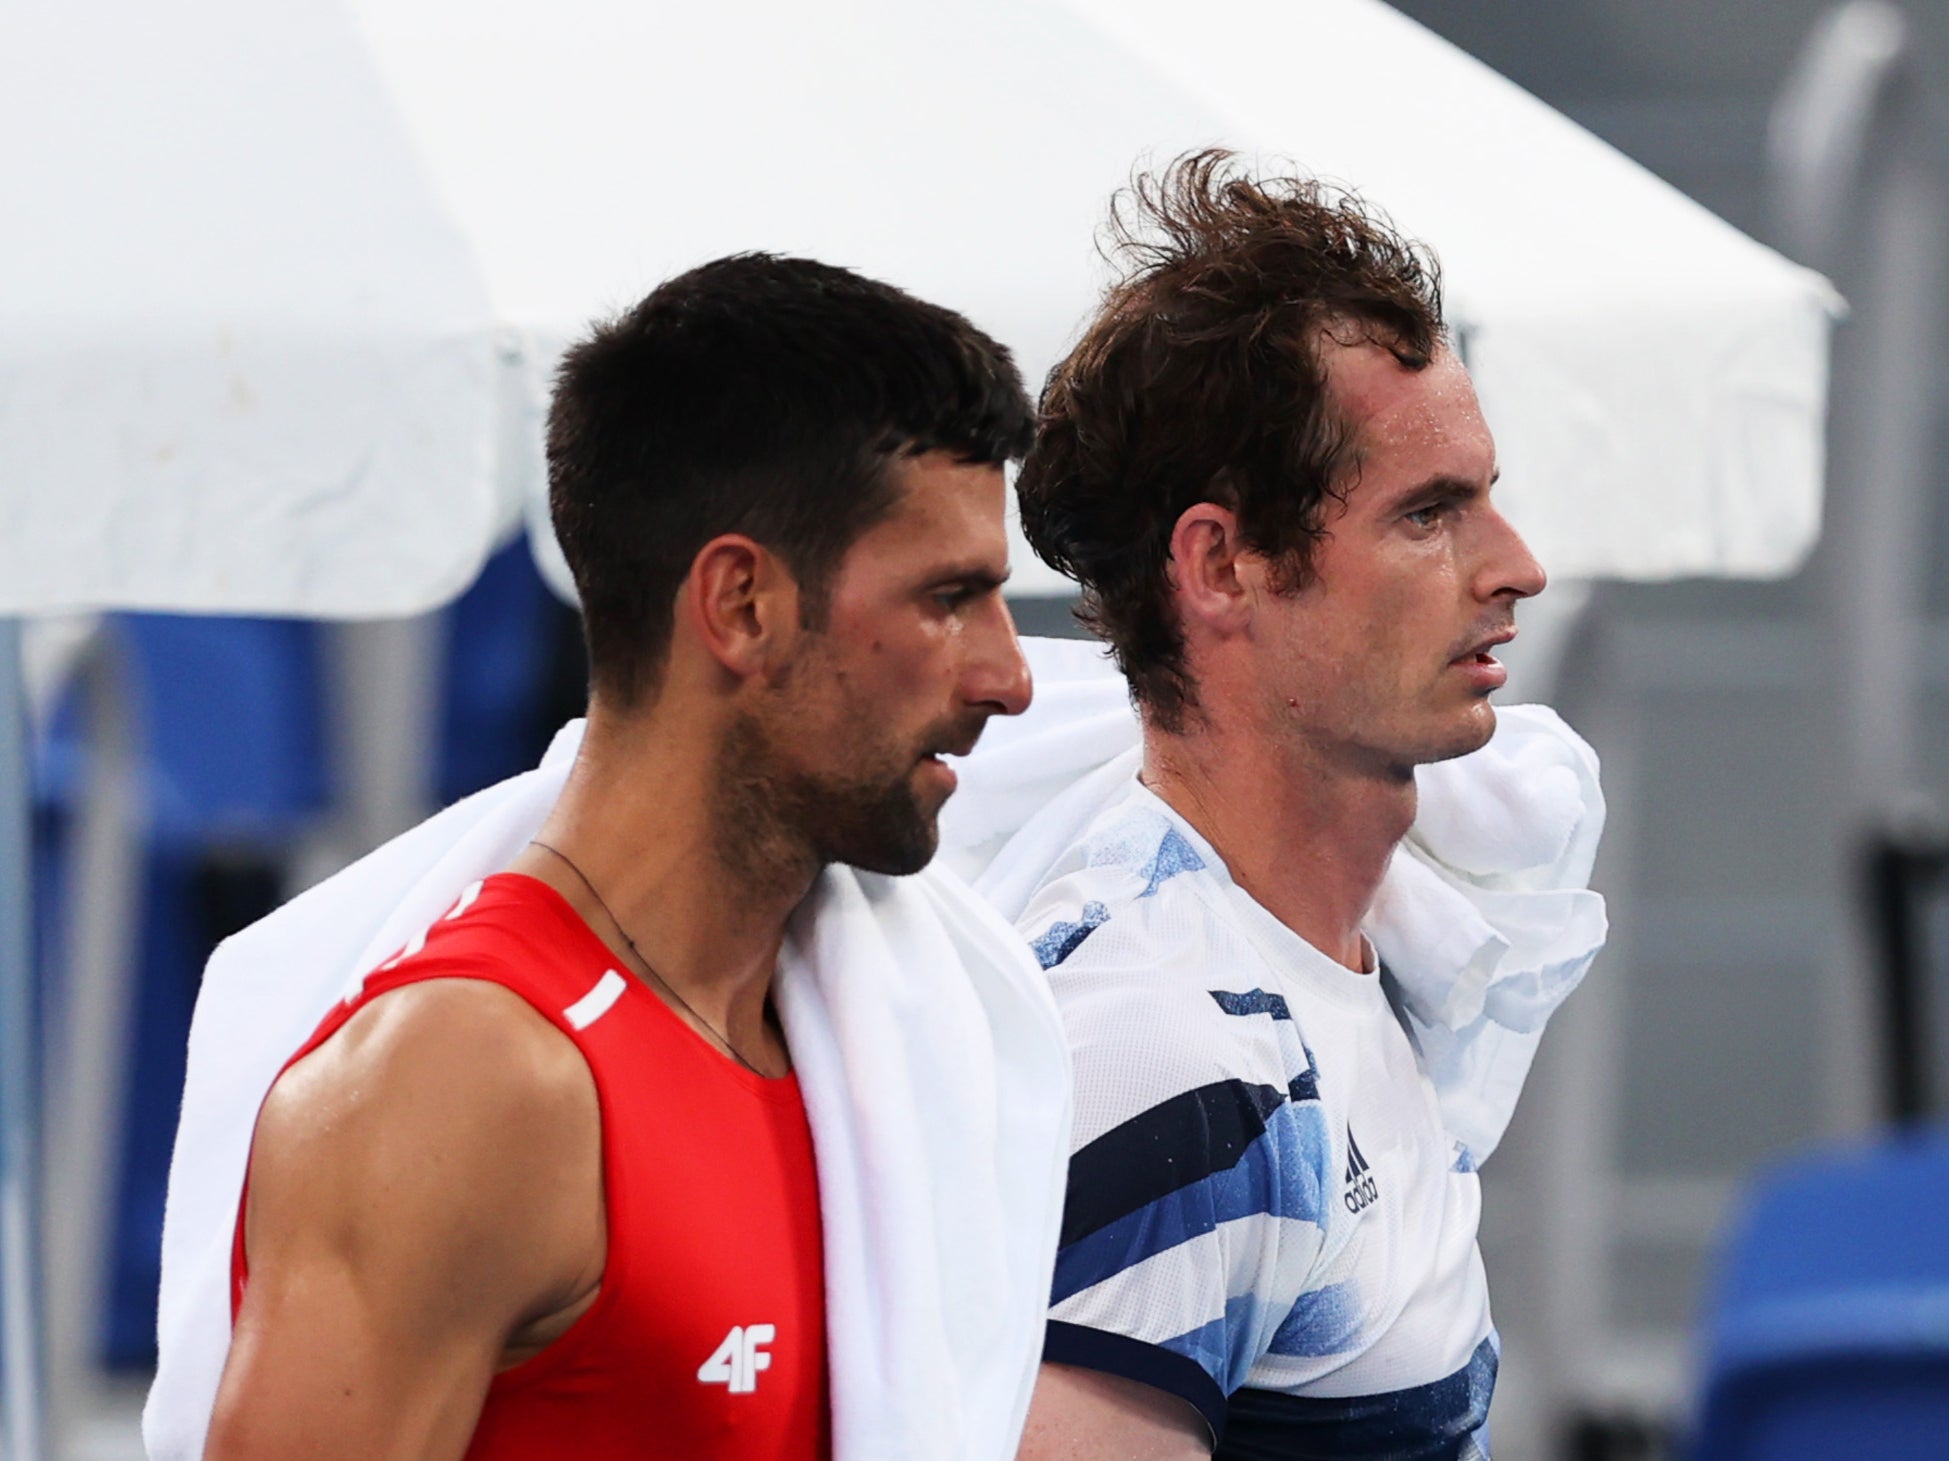 Murray and Djokovic have played alongside each other for years